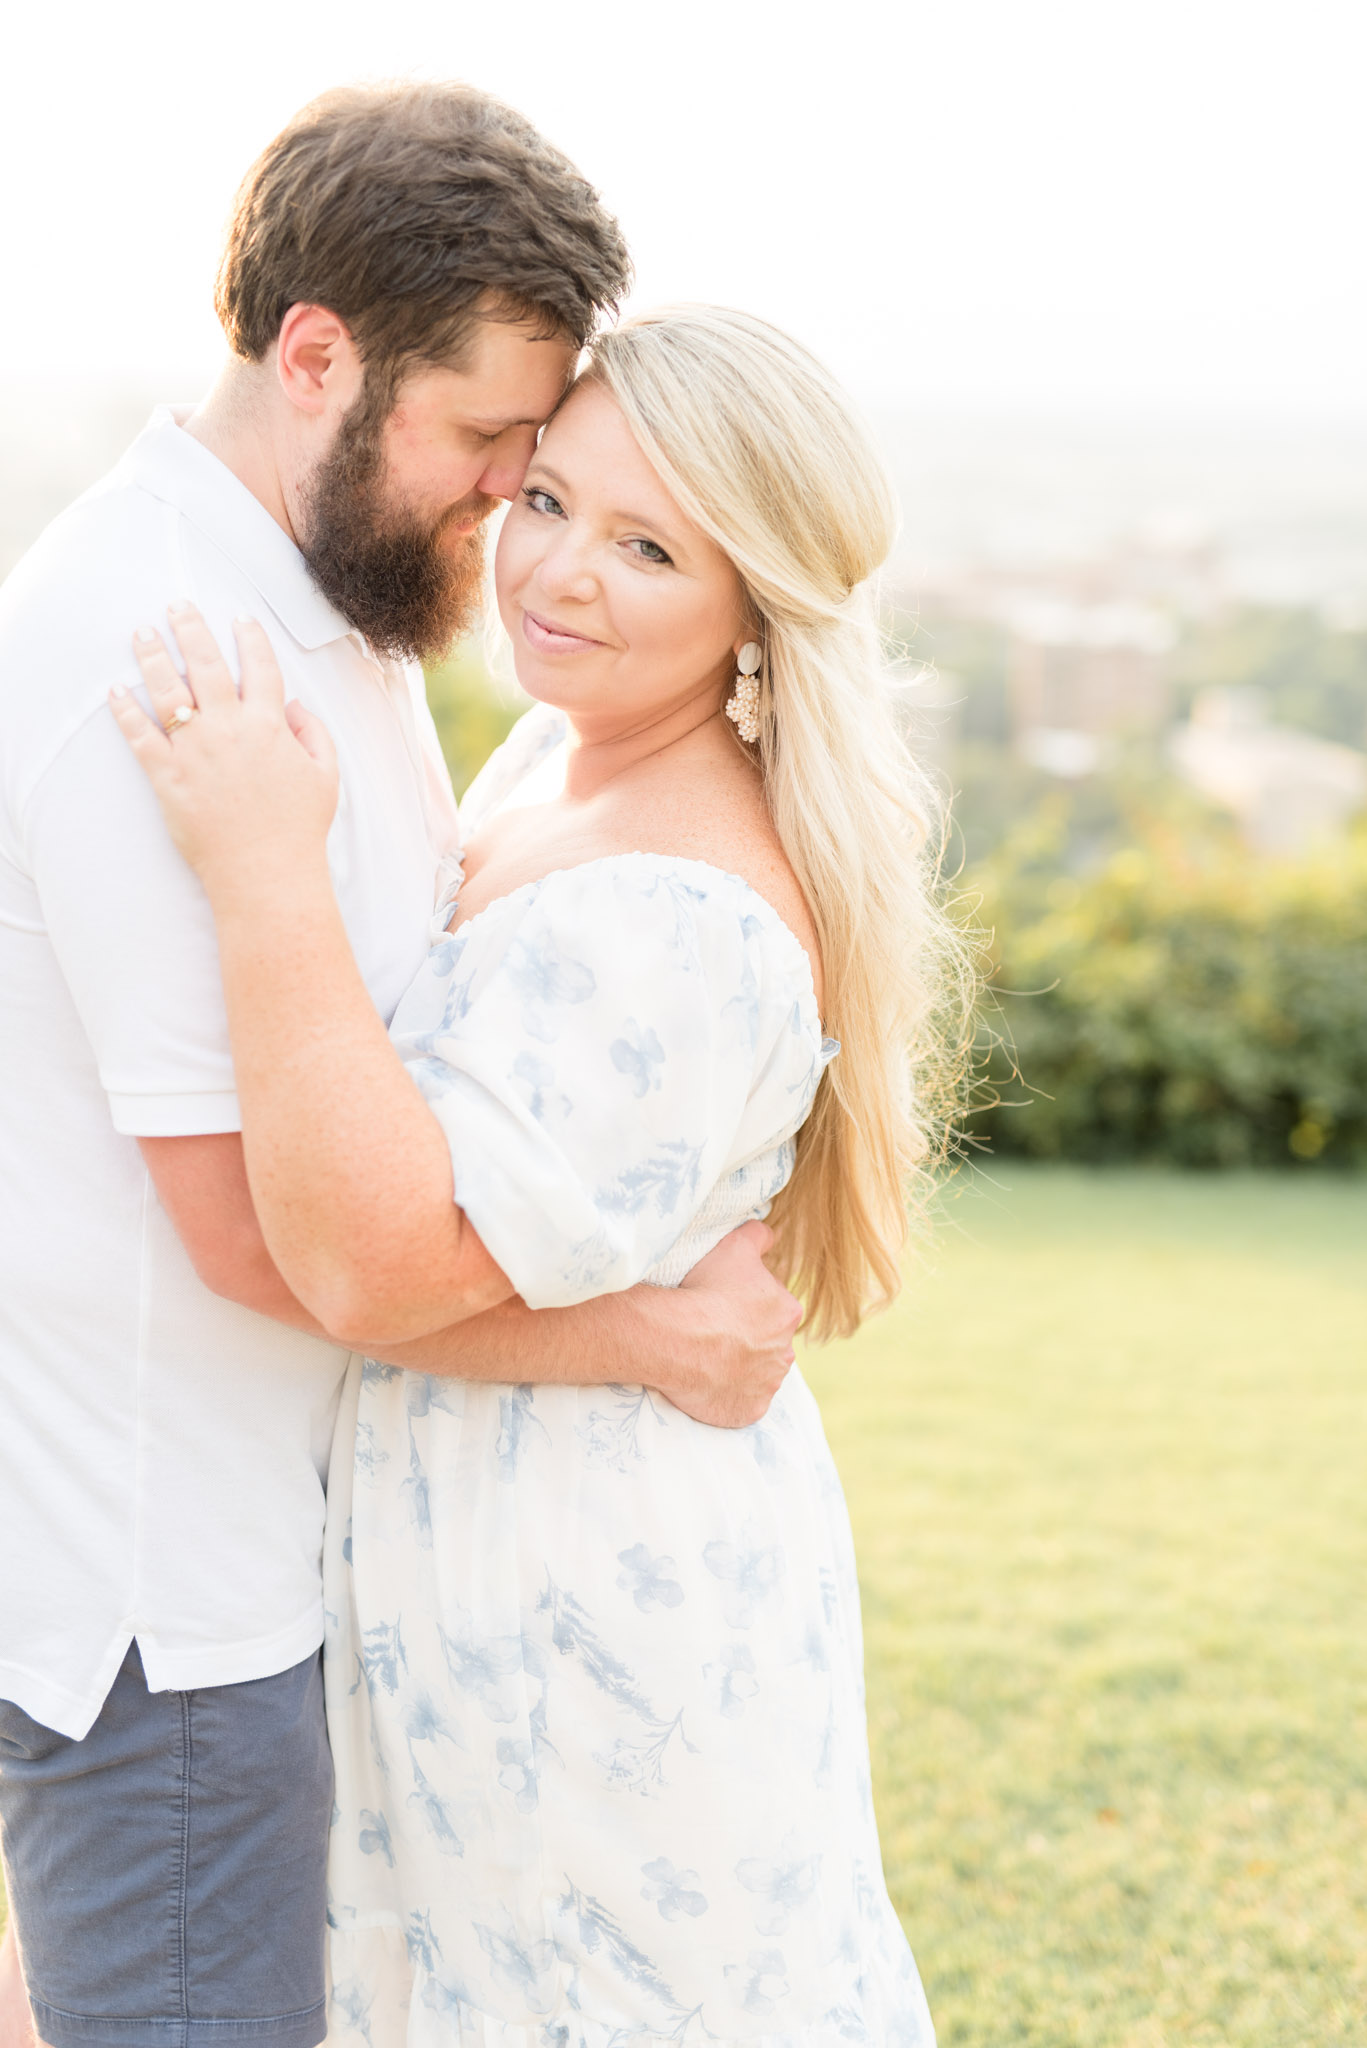 Woman looks at camera while husband cuddles her.